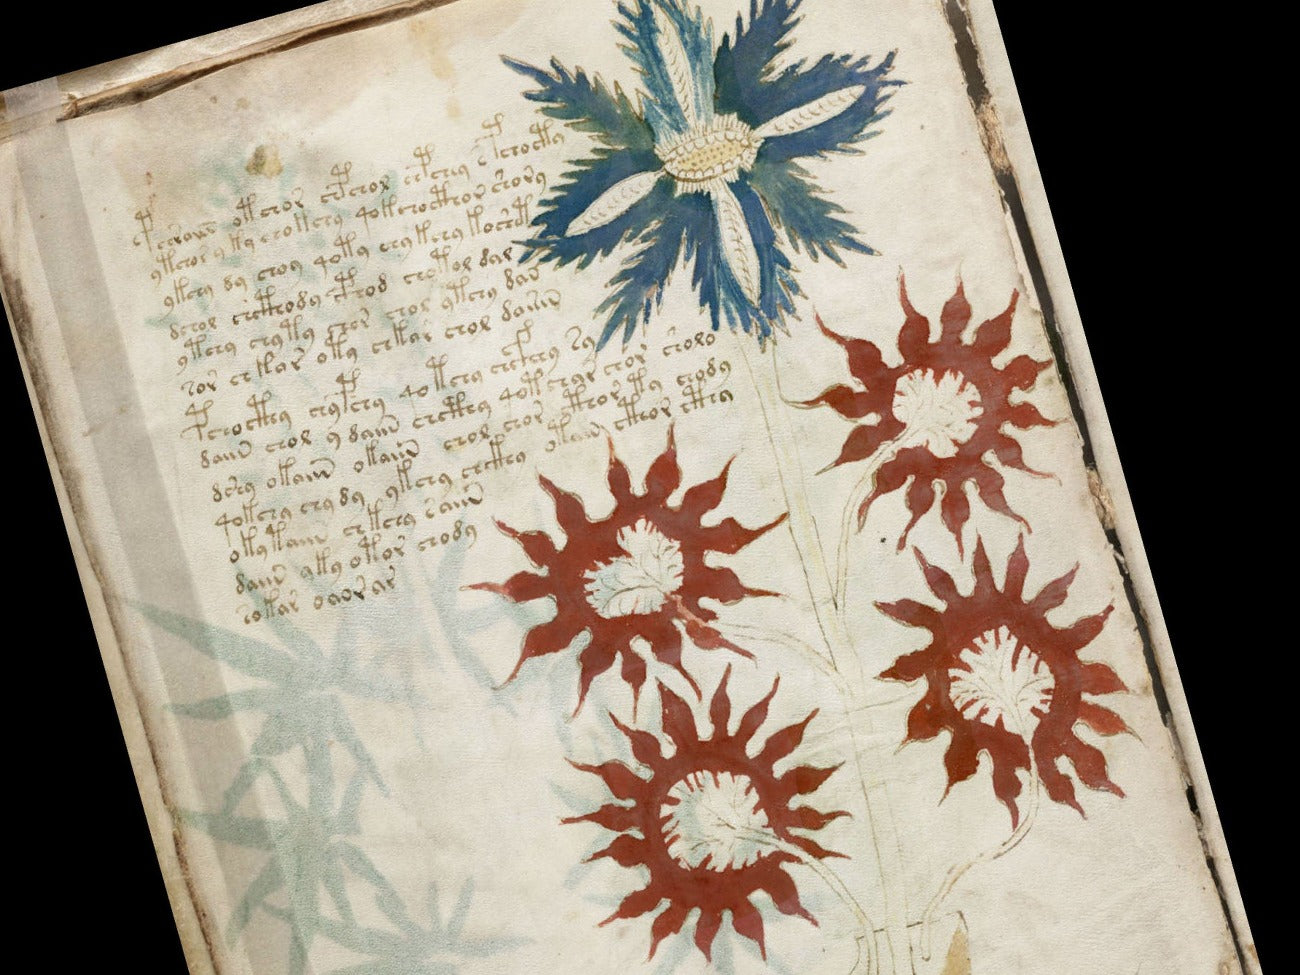 Close-up image of one page of the Voynich Manuscript showing script and image detail- Morgana Magick Spell